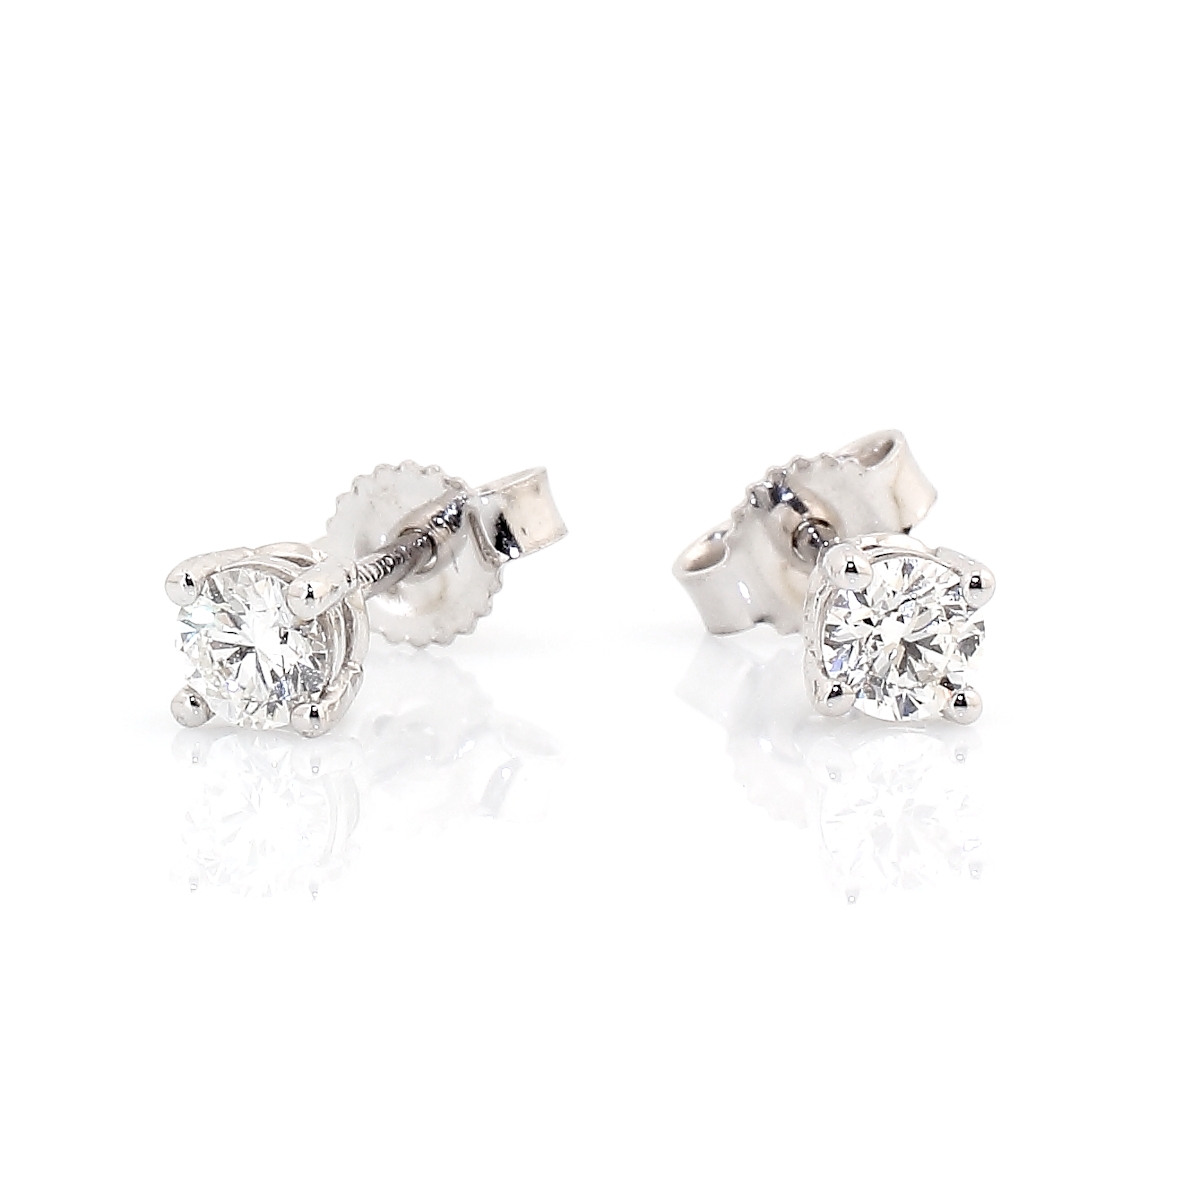 18 KT White Gold Earrings with diamonds kt. 0,46